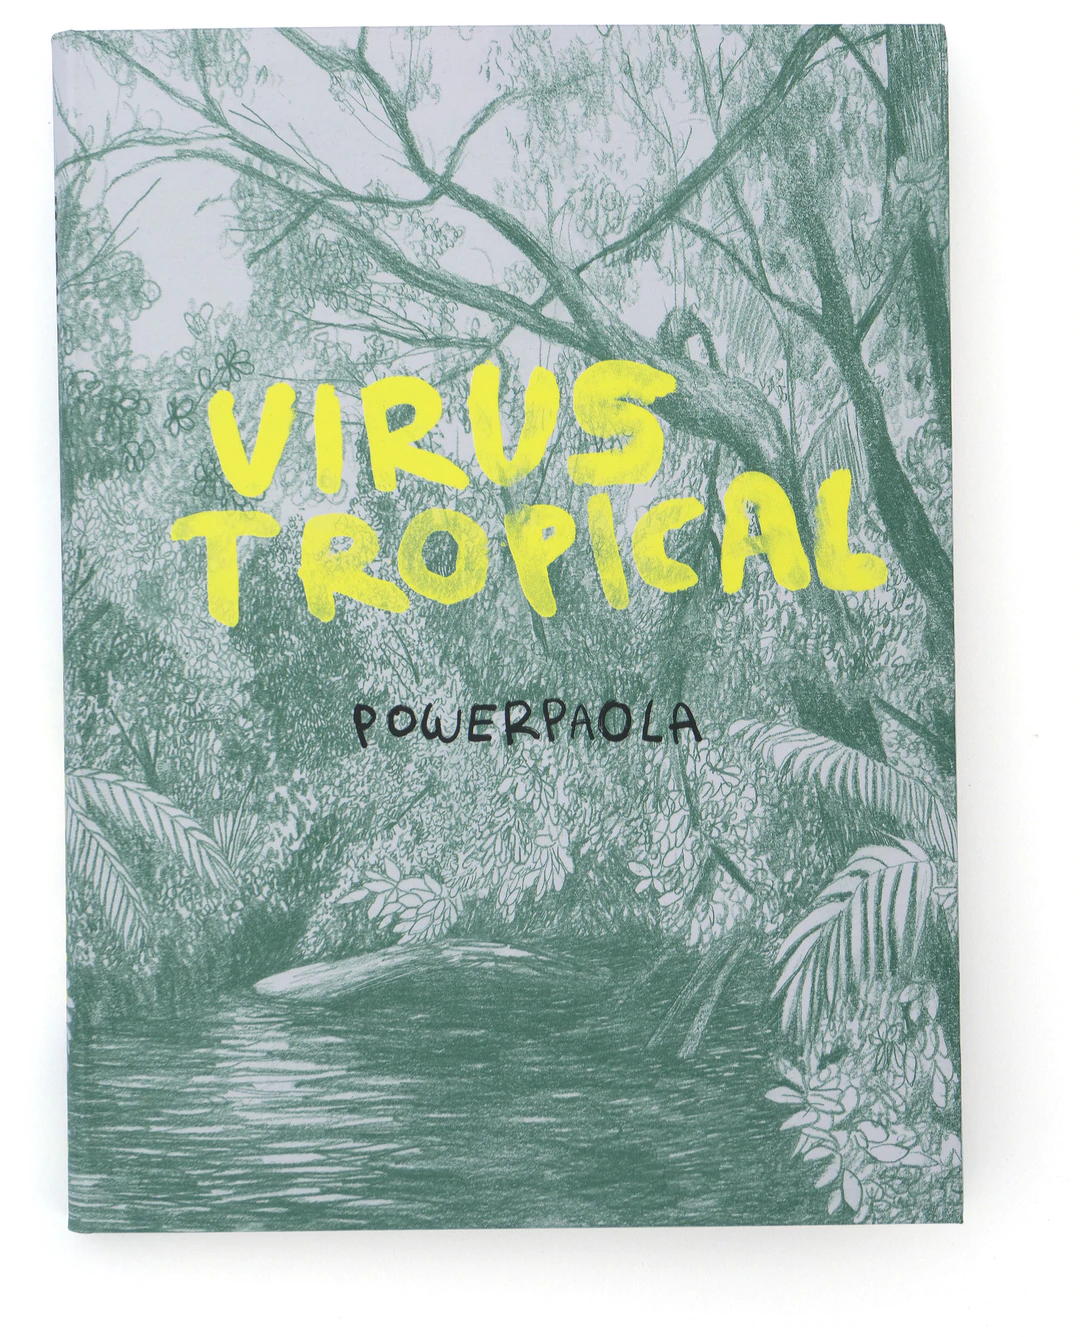 Virus Tropical by Powerpaola Graphic Novel